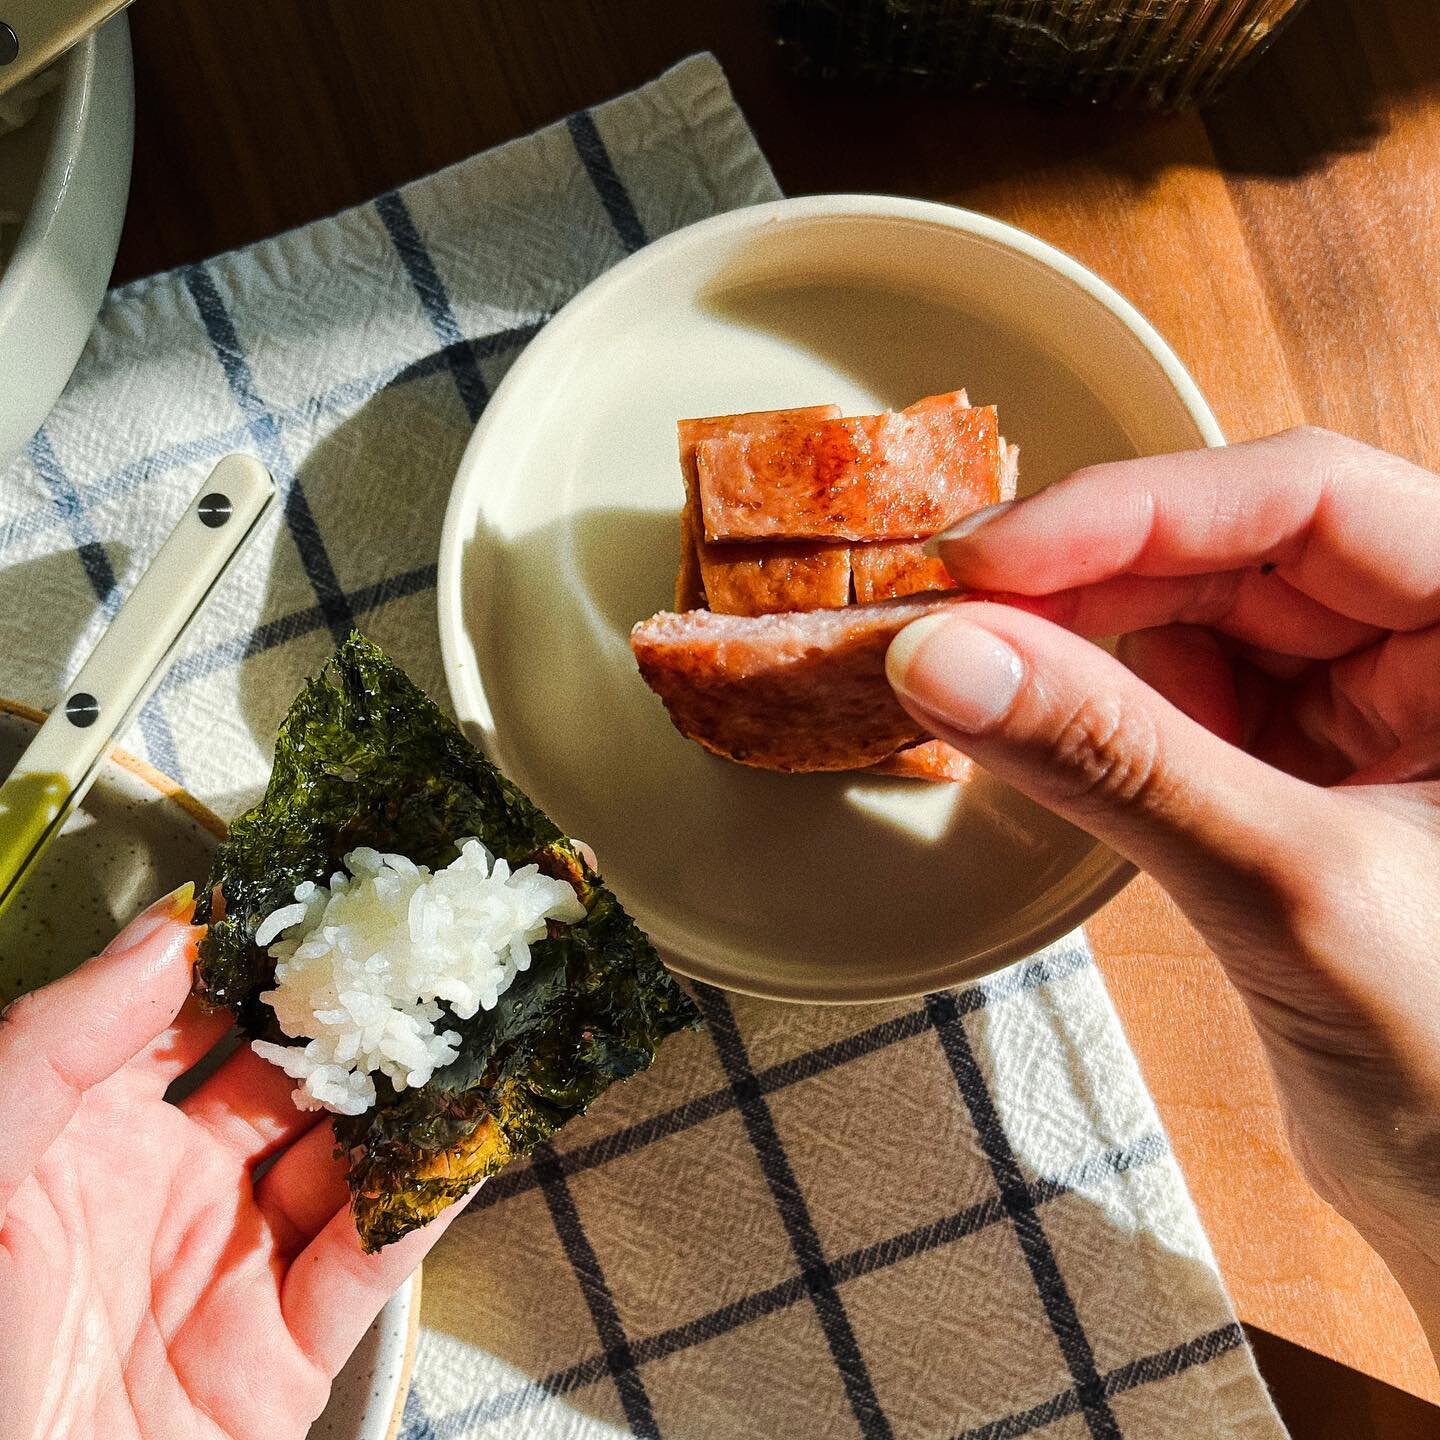 Mini spam masubi &mdash; aka we didn&rsquo;t have larger sheets of nori to wrap the masubi so we used the lil&rsquo; seaweed snack packs for a diy-at-the-table version 🍙✨